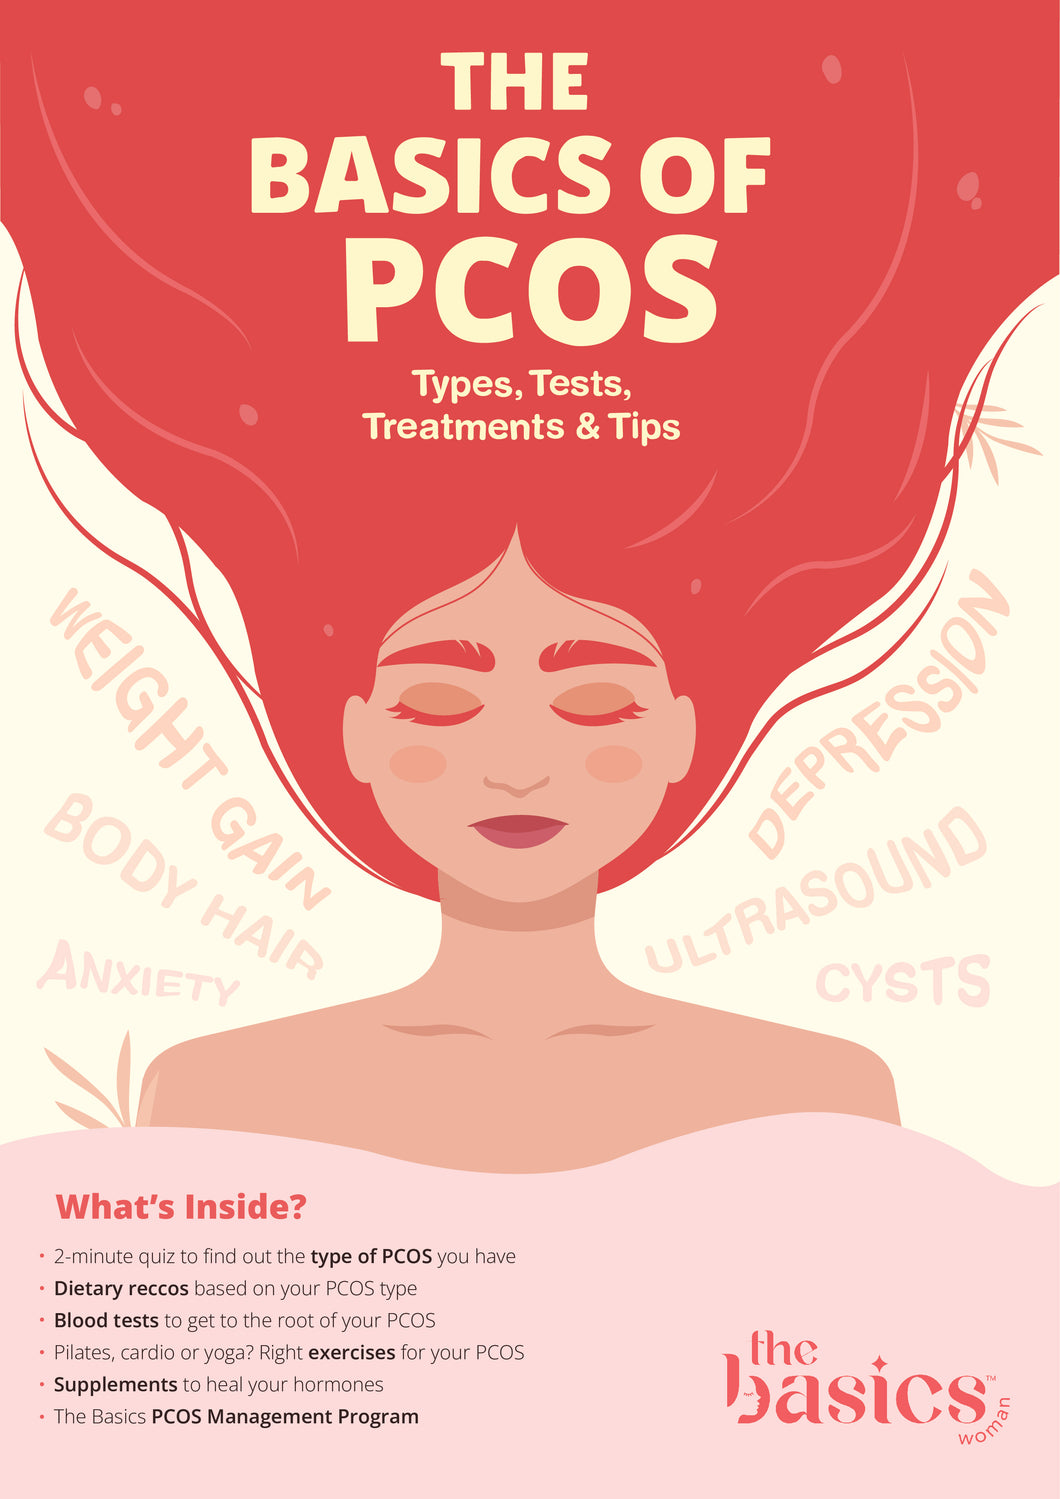 The Basics Of PCOS